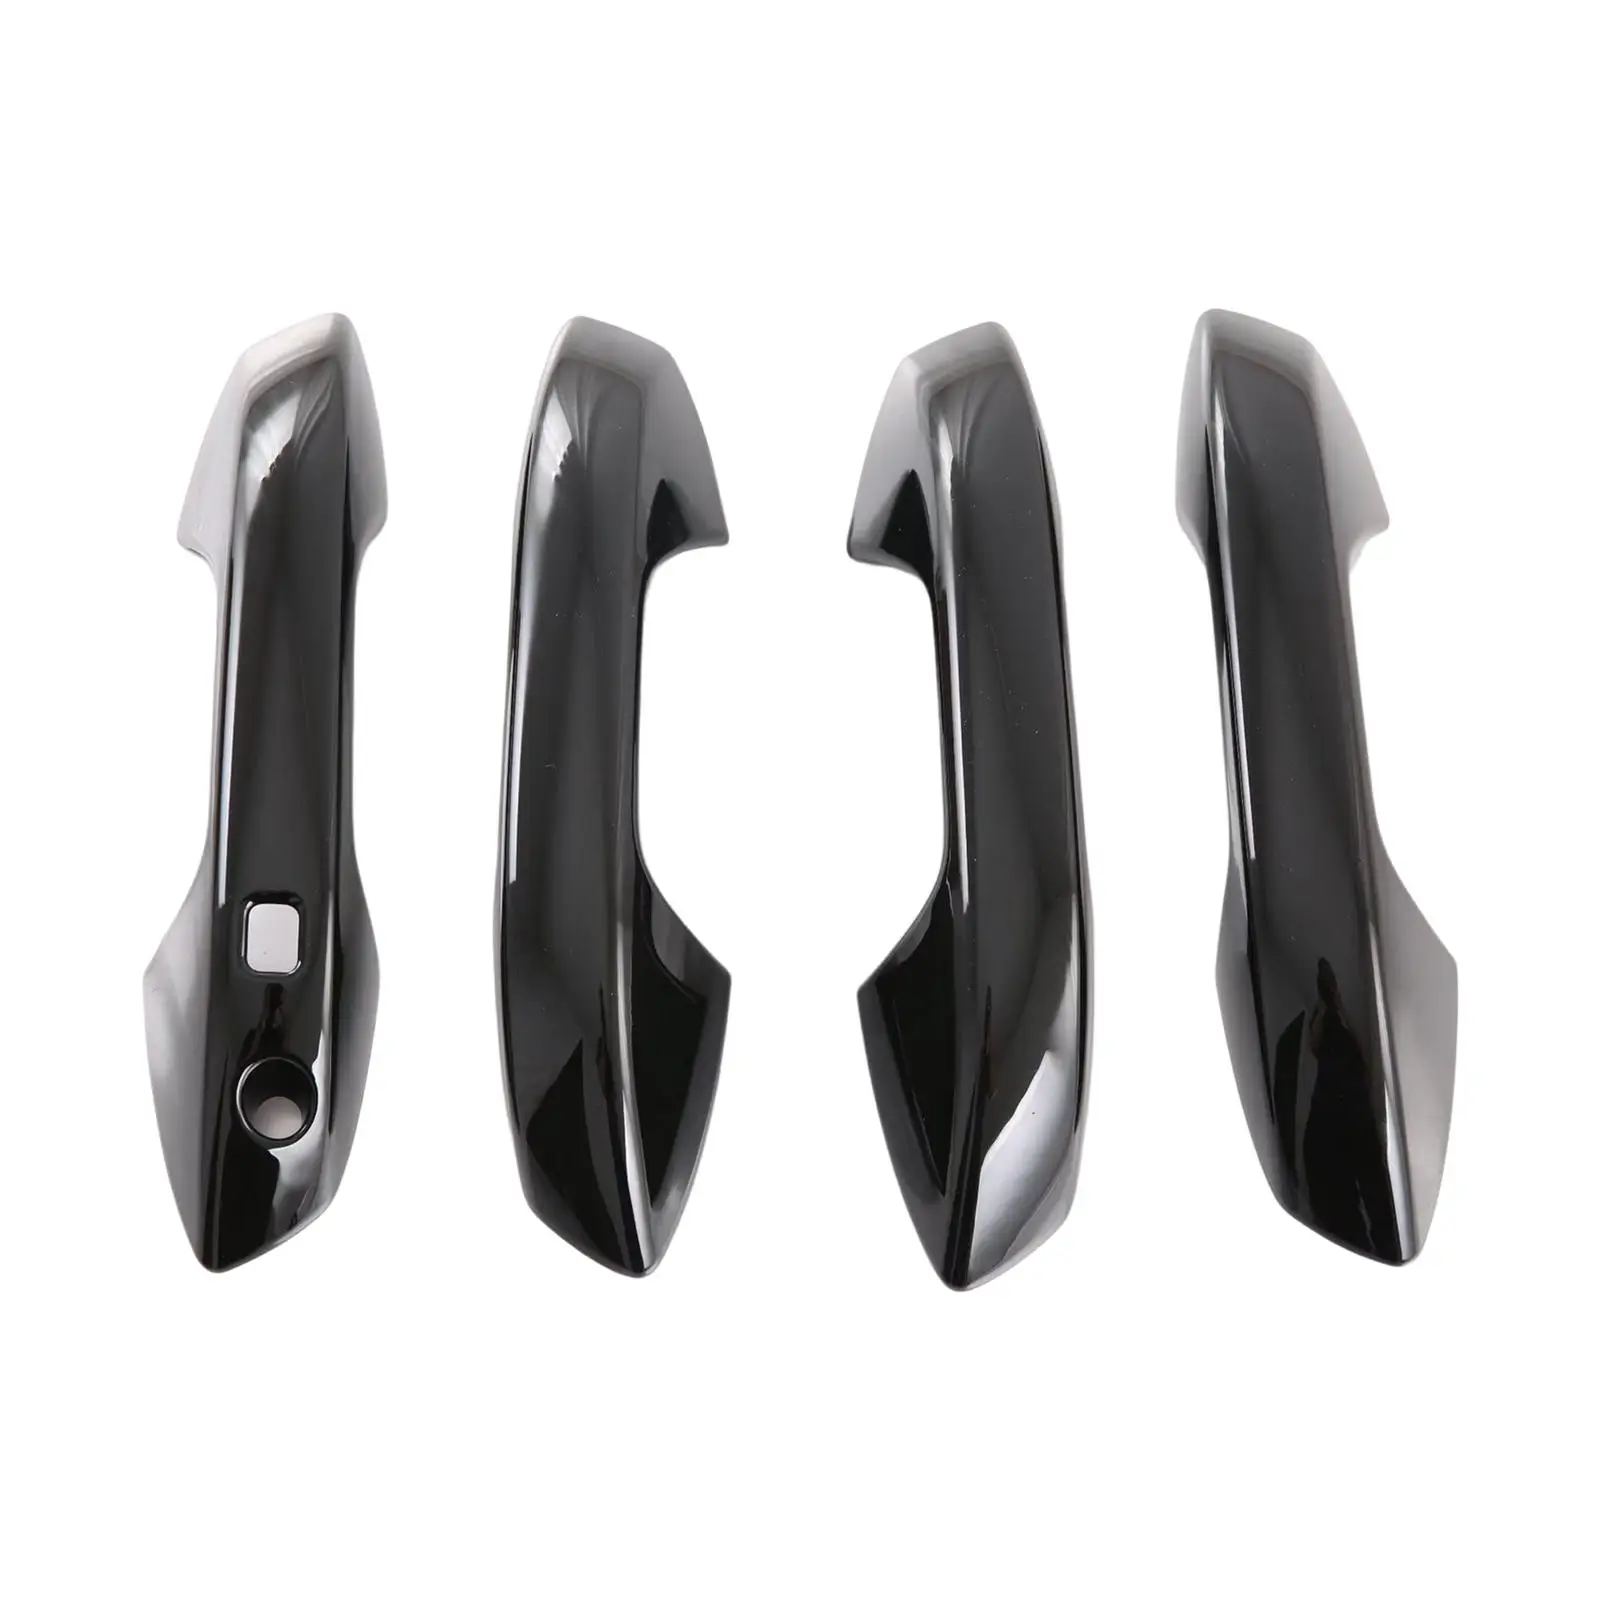 Auto Door Handle Protective Cover Scratch Resistant for Byd Yuan Plus